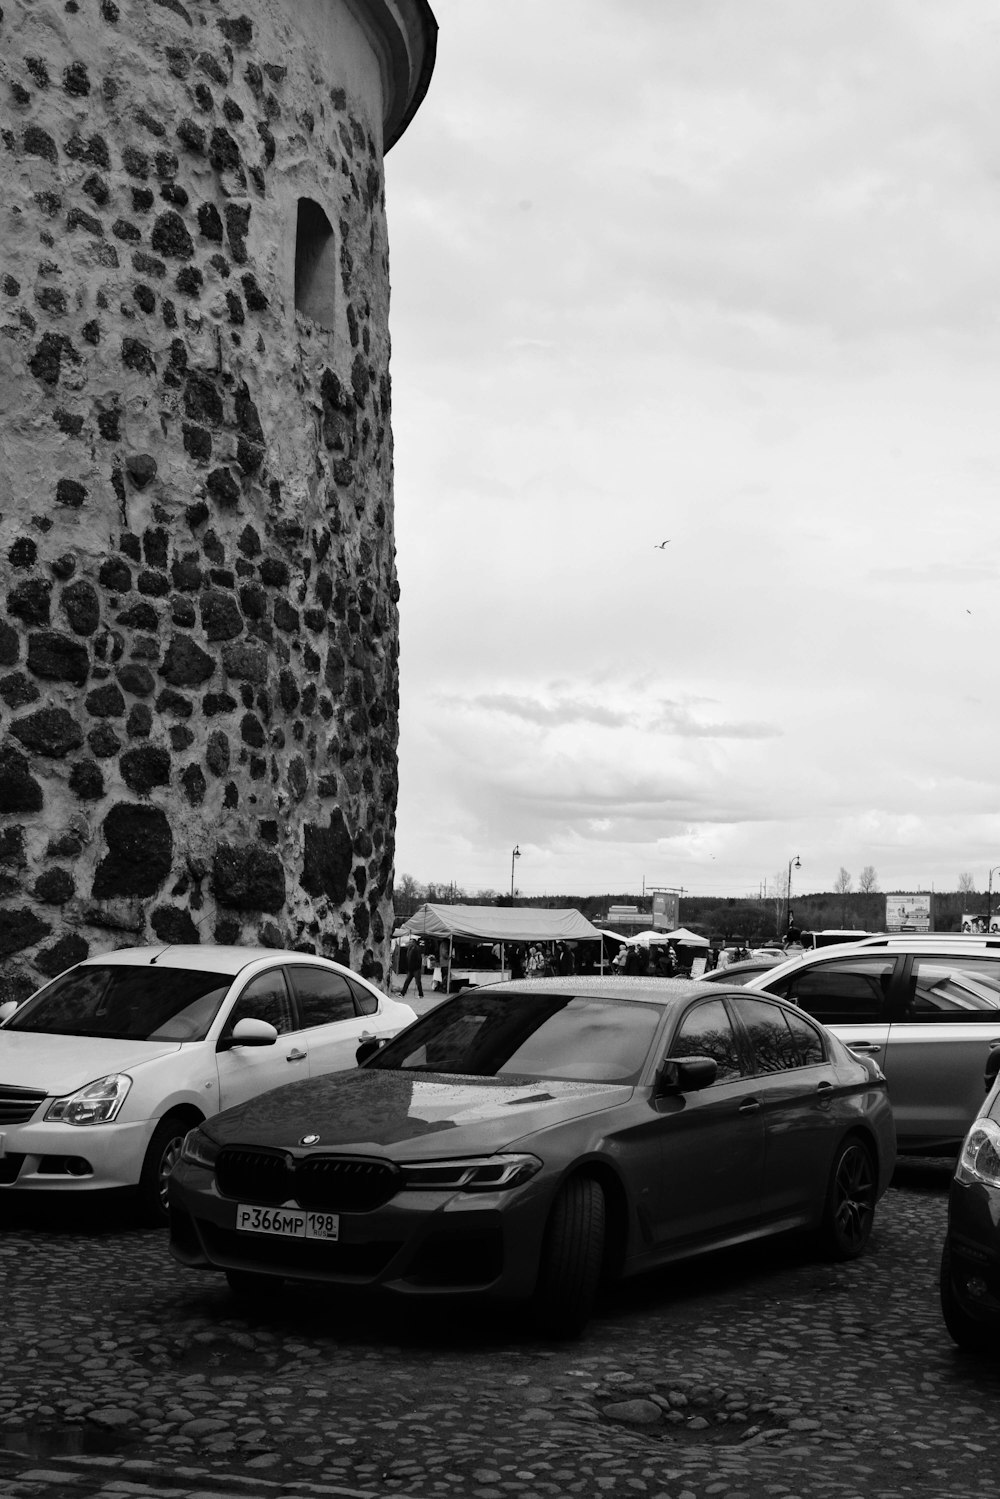 cars parked in a parking lot